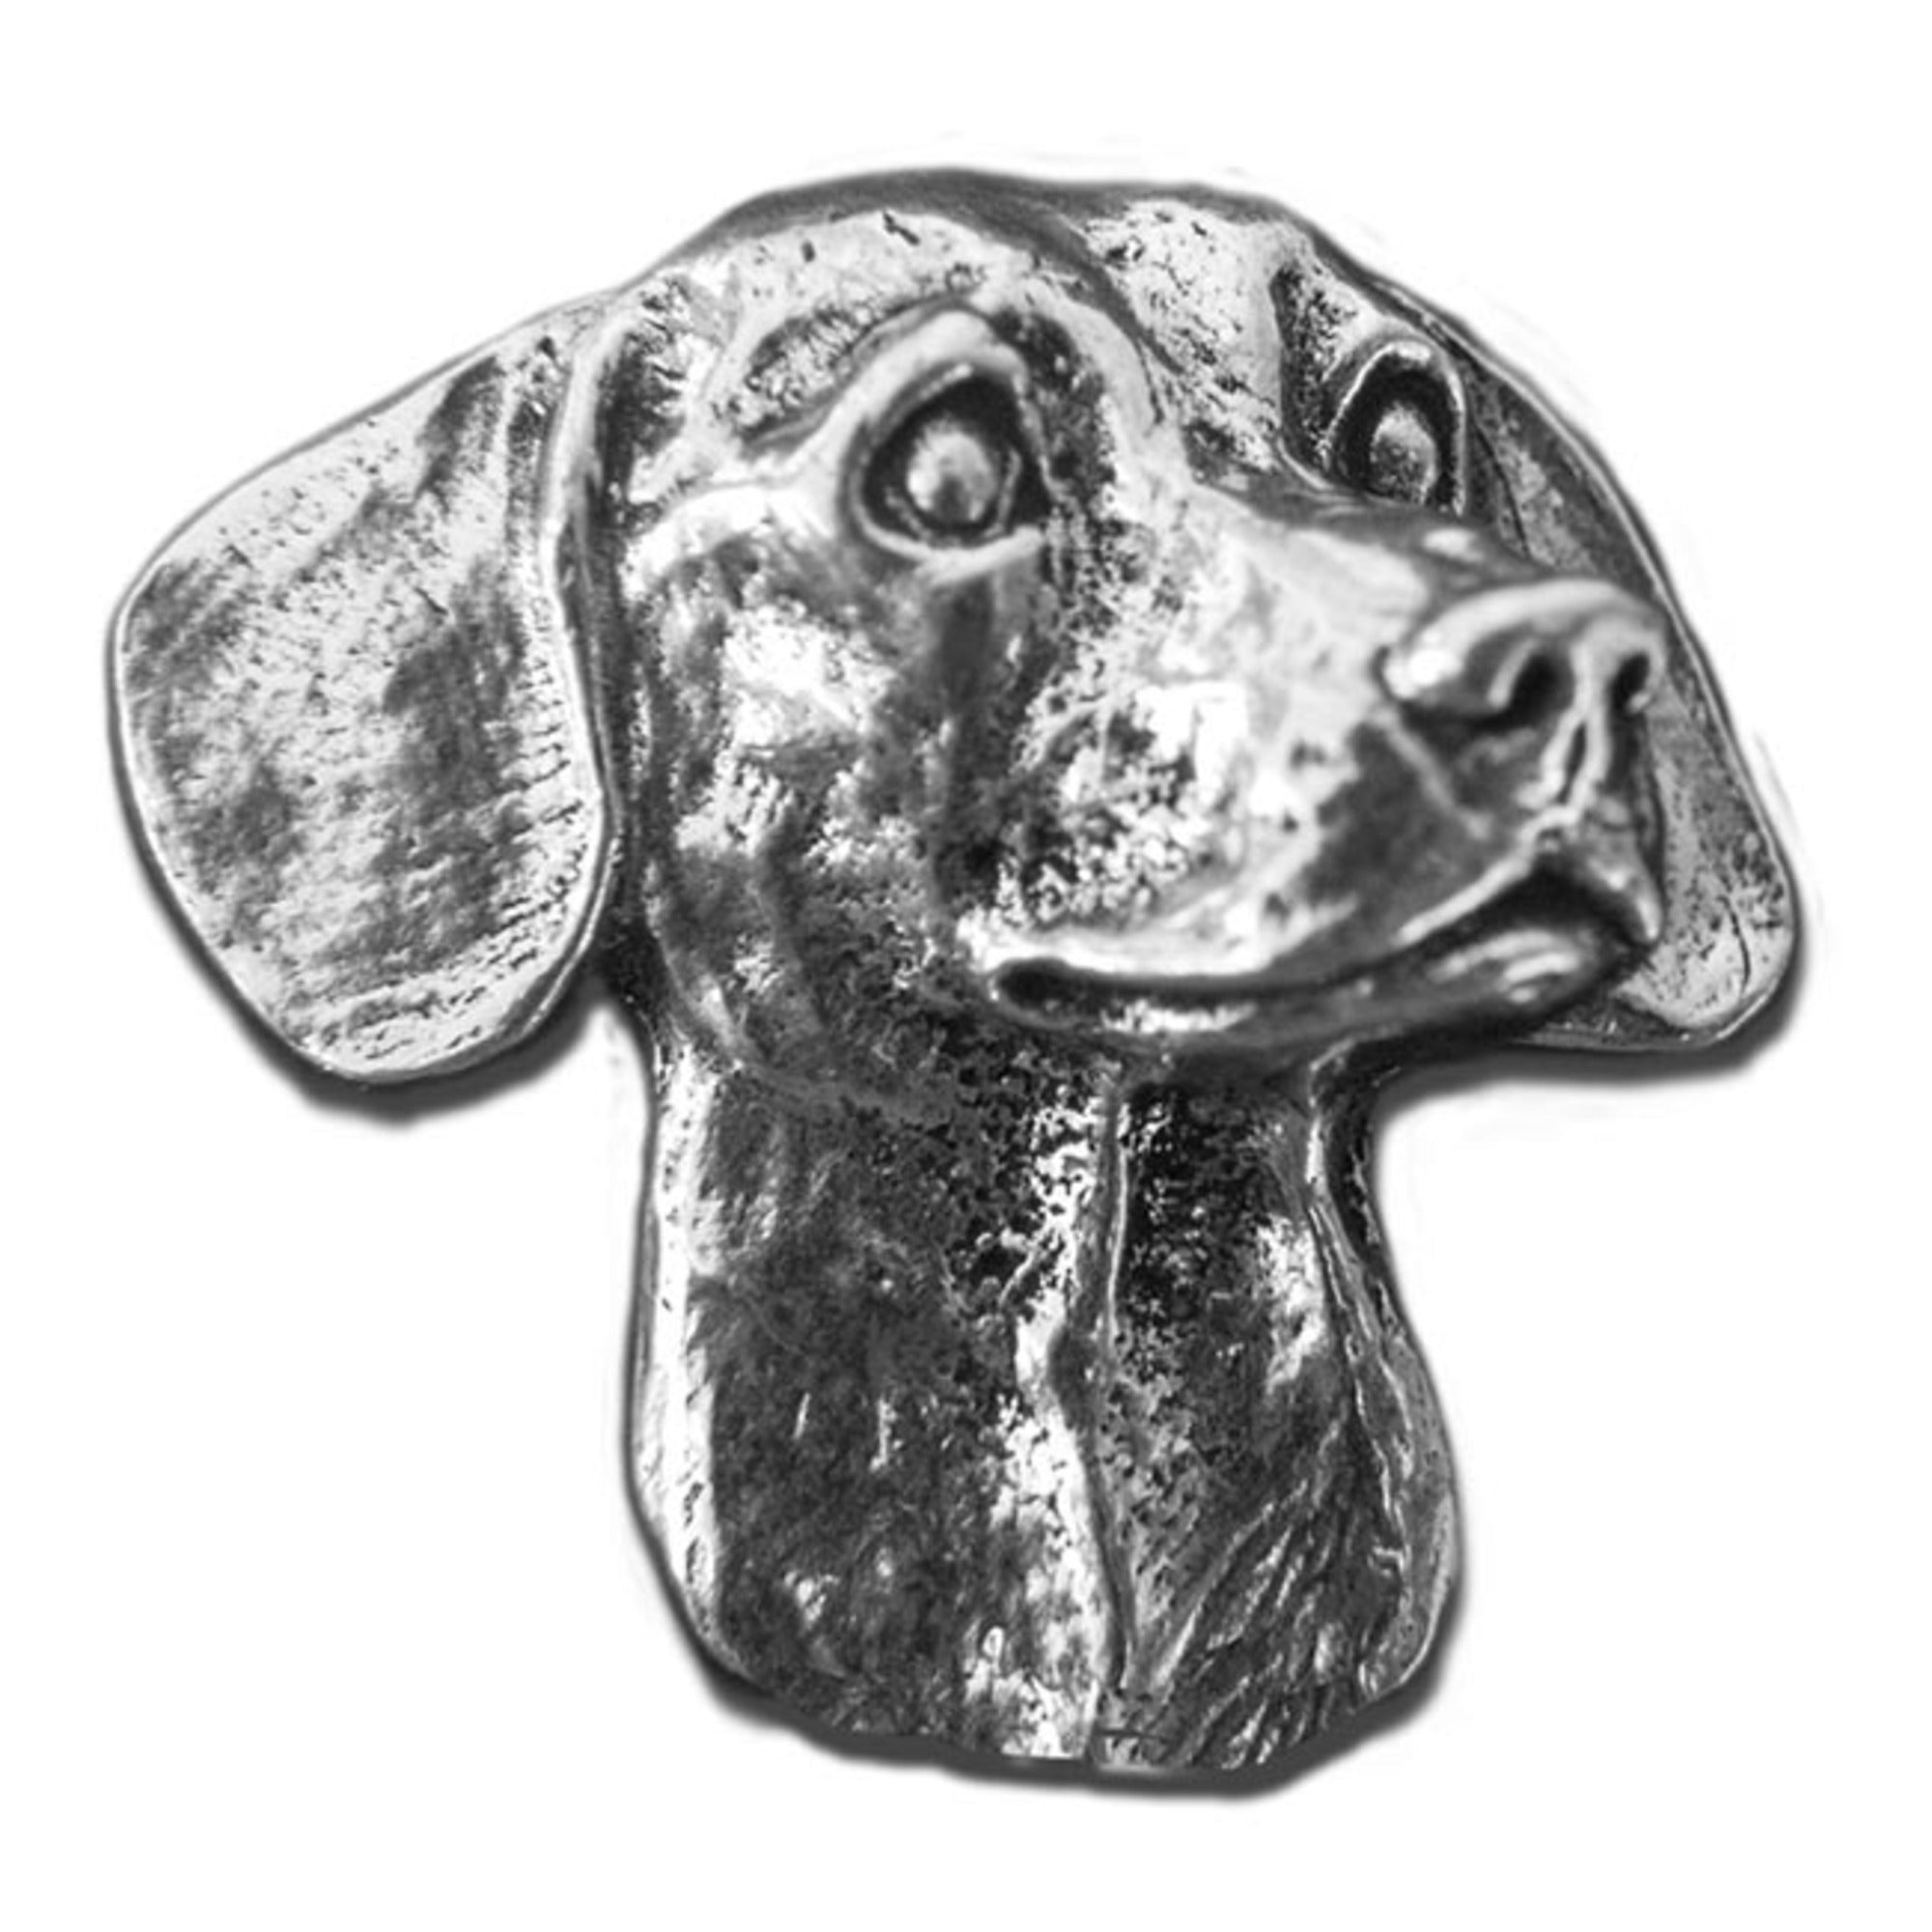 New-Spin Metal Casting Dachshund Magnet